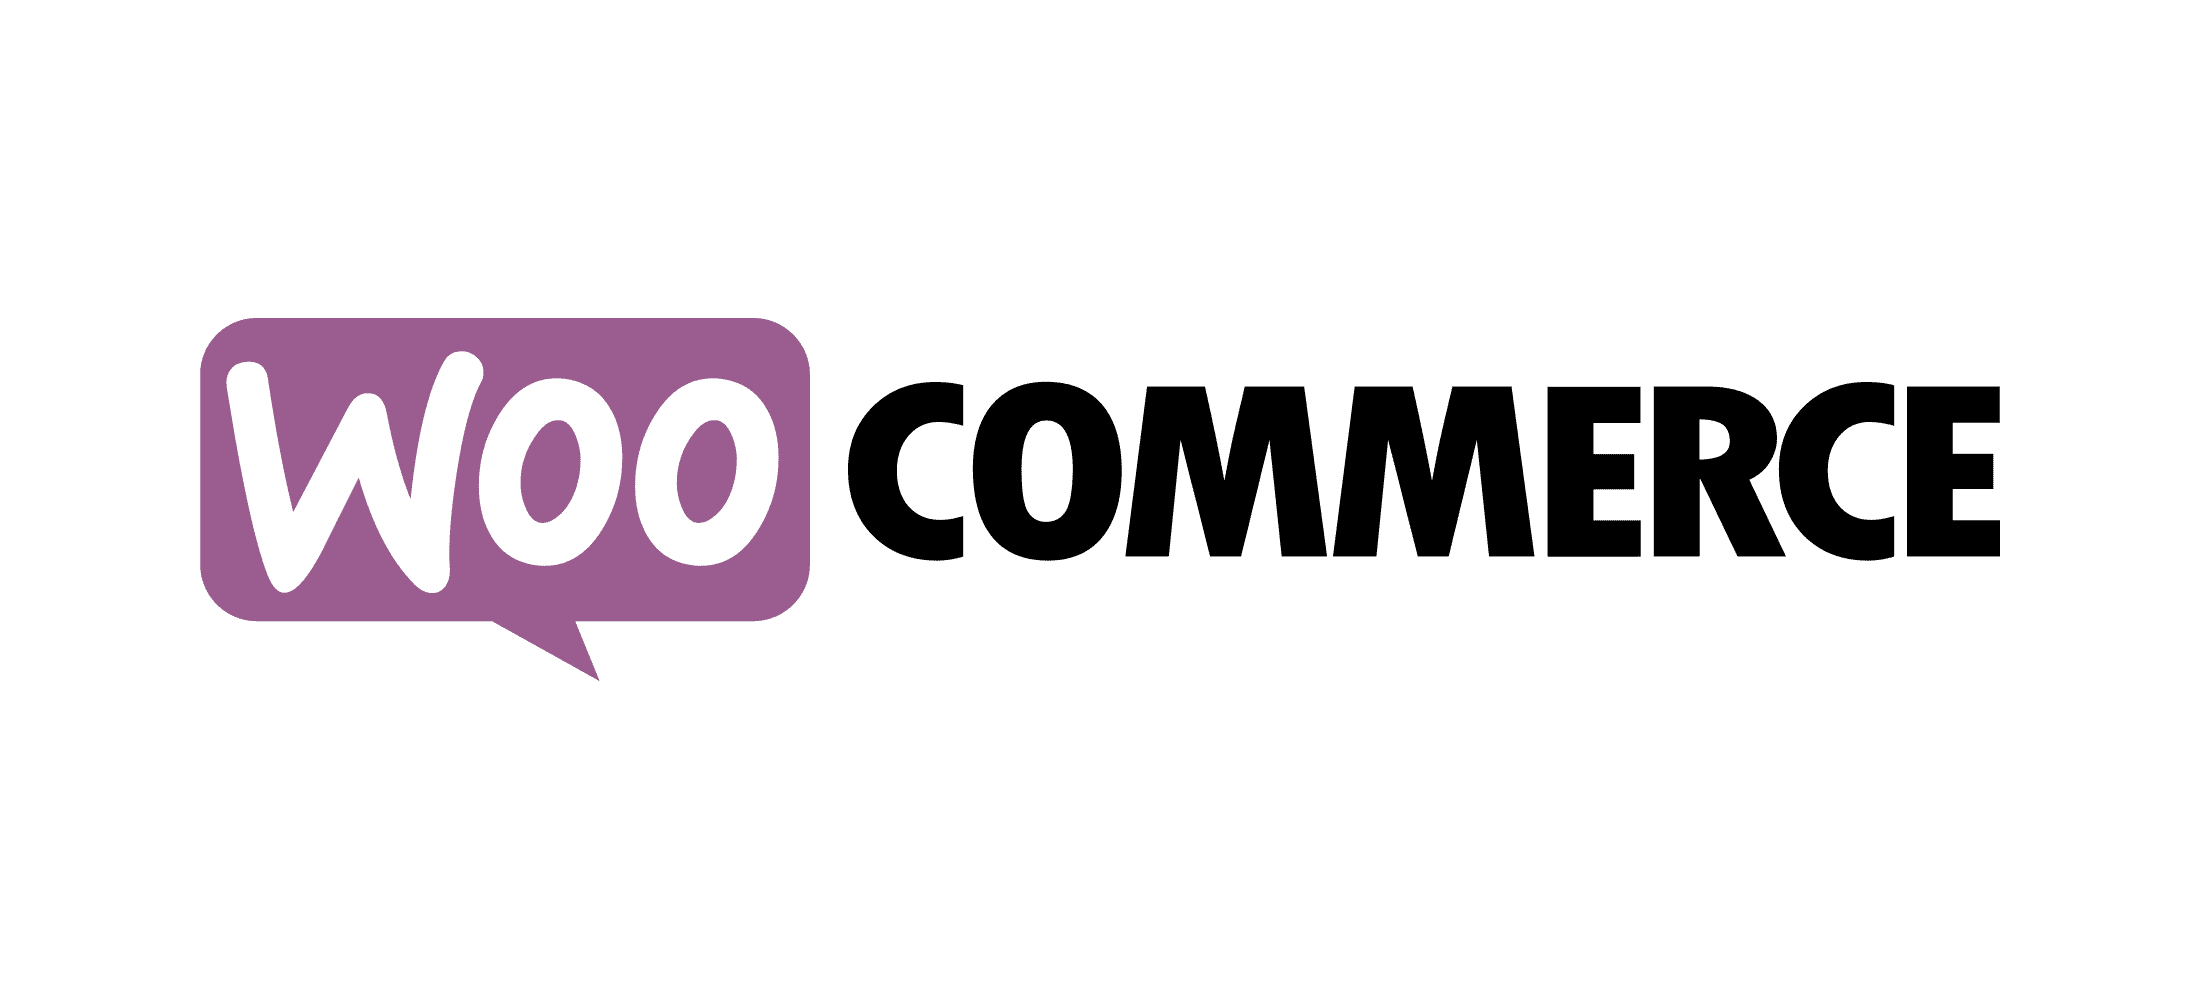 Why WooCommerce is so popular?